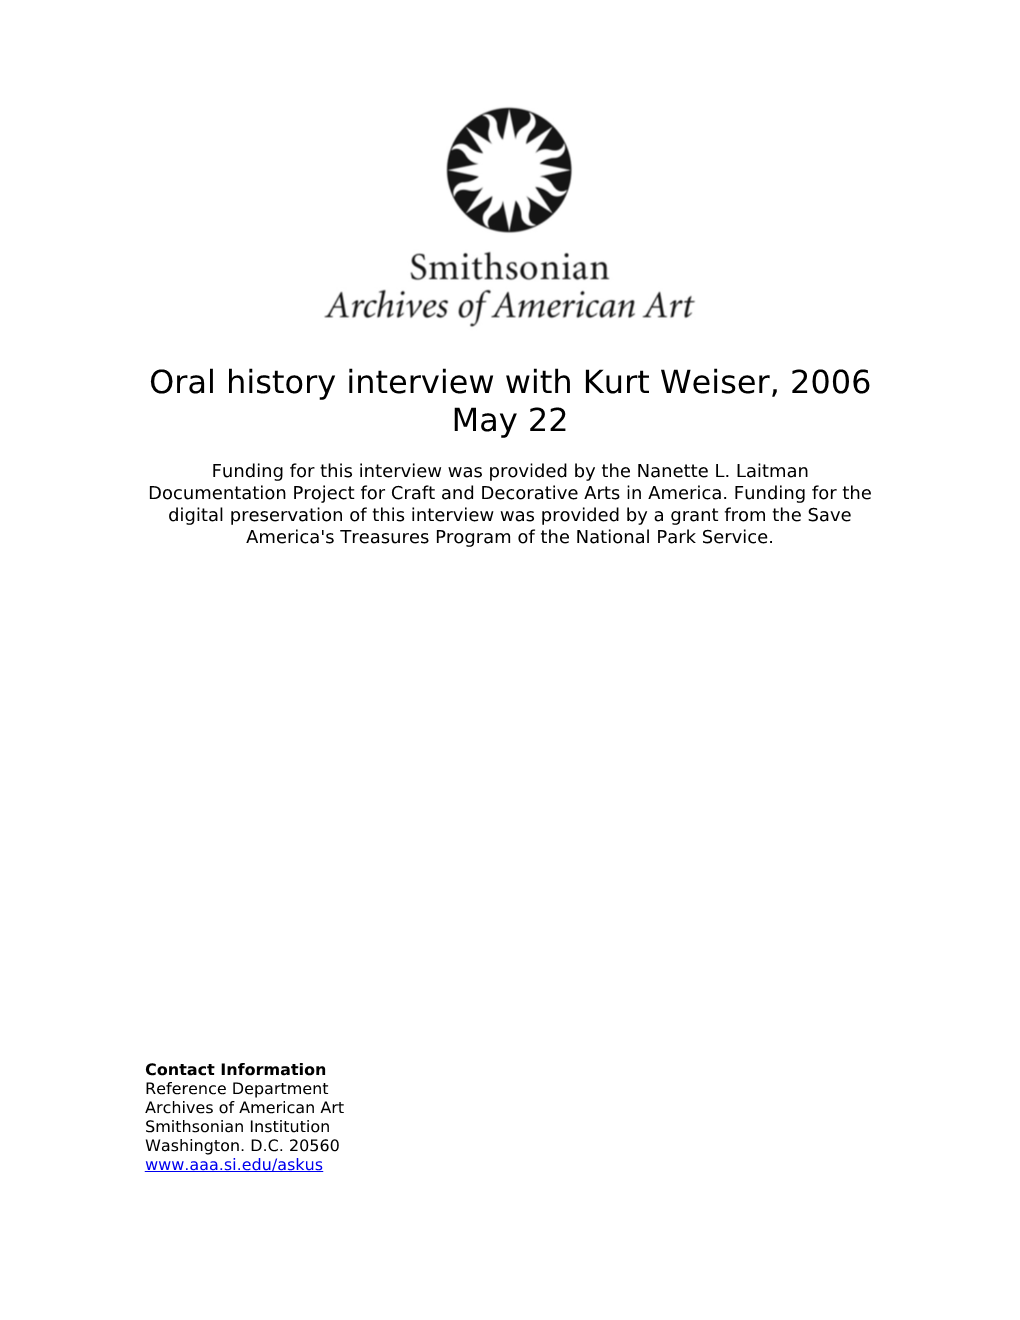 Oral History Interview with Kurt Weiser, 2006 May 22